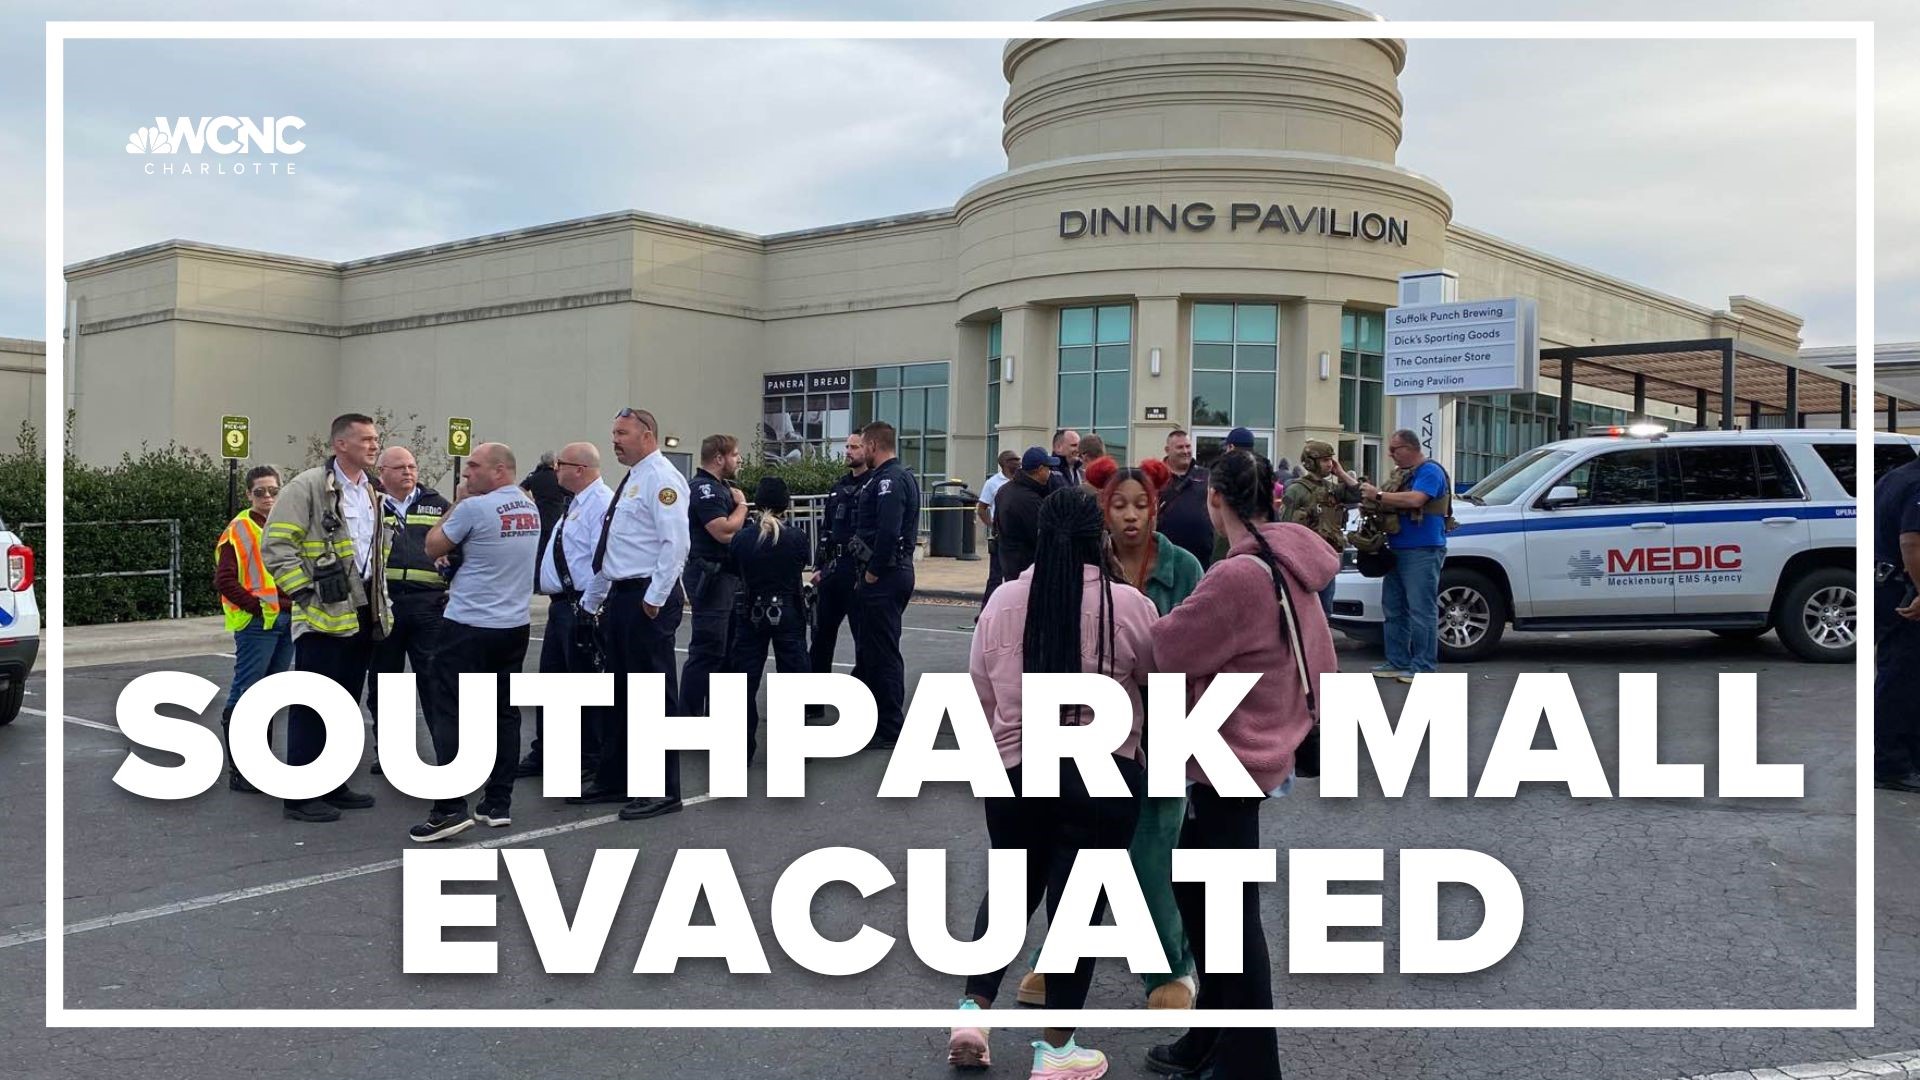 Two people were detained after a disturbance led to the evacuation of SouthPark Mall Saturday afternoon, police said.